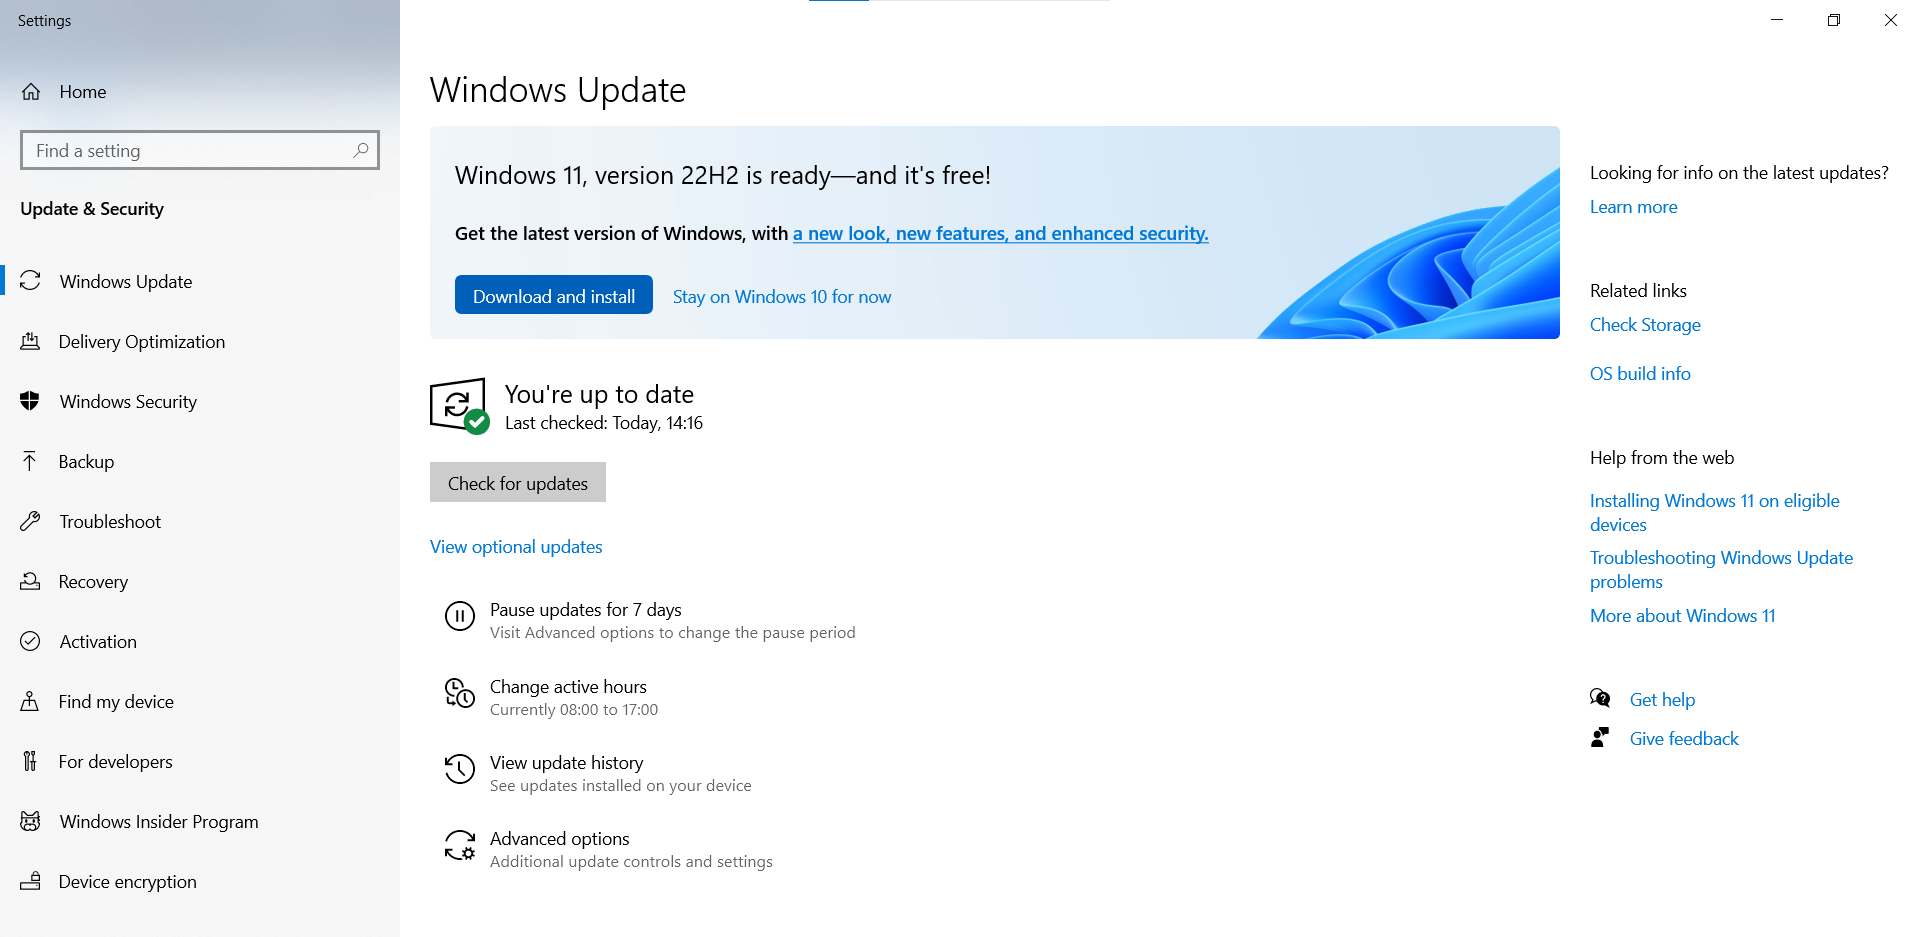 Windows 11 is available